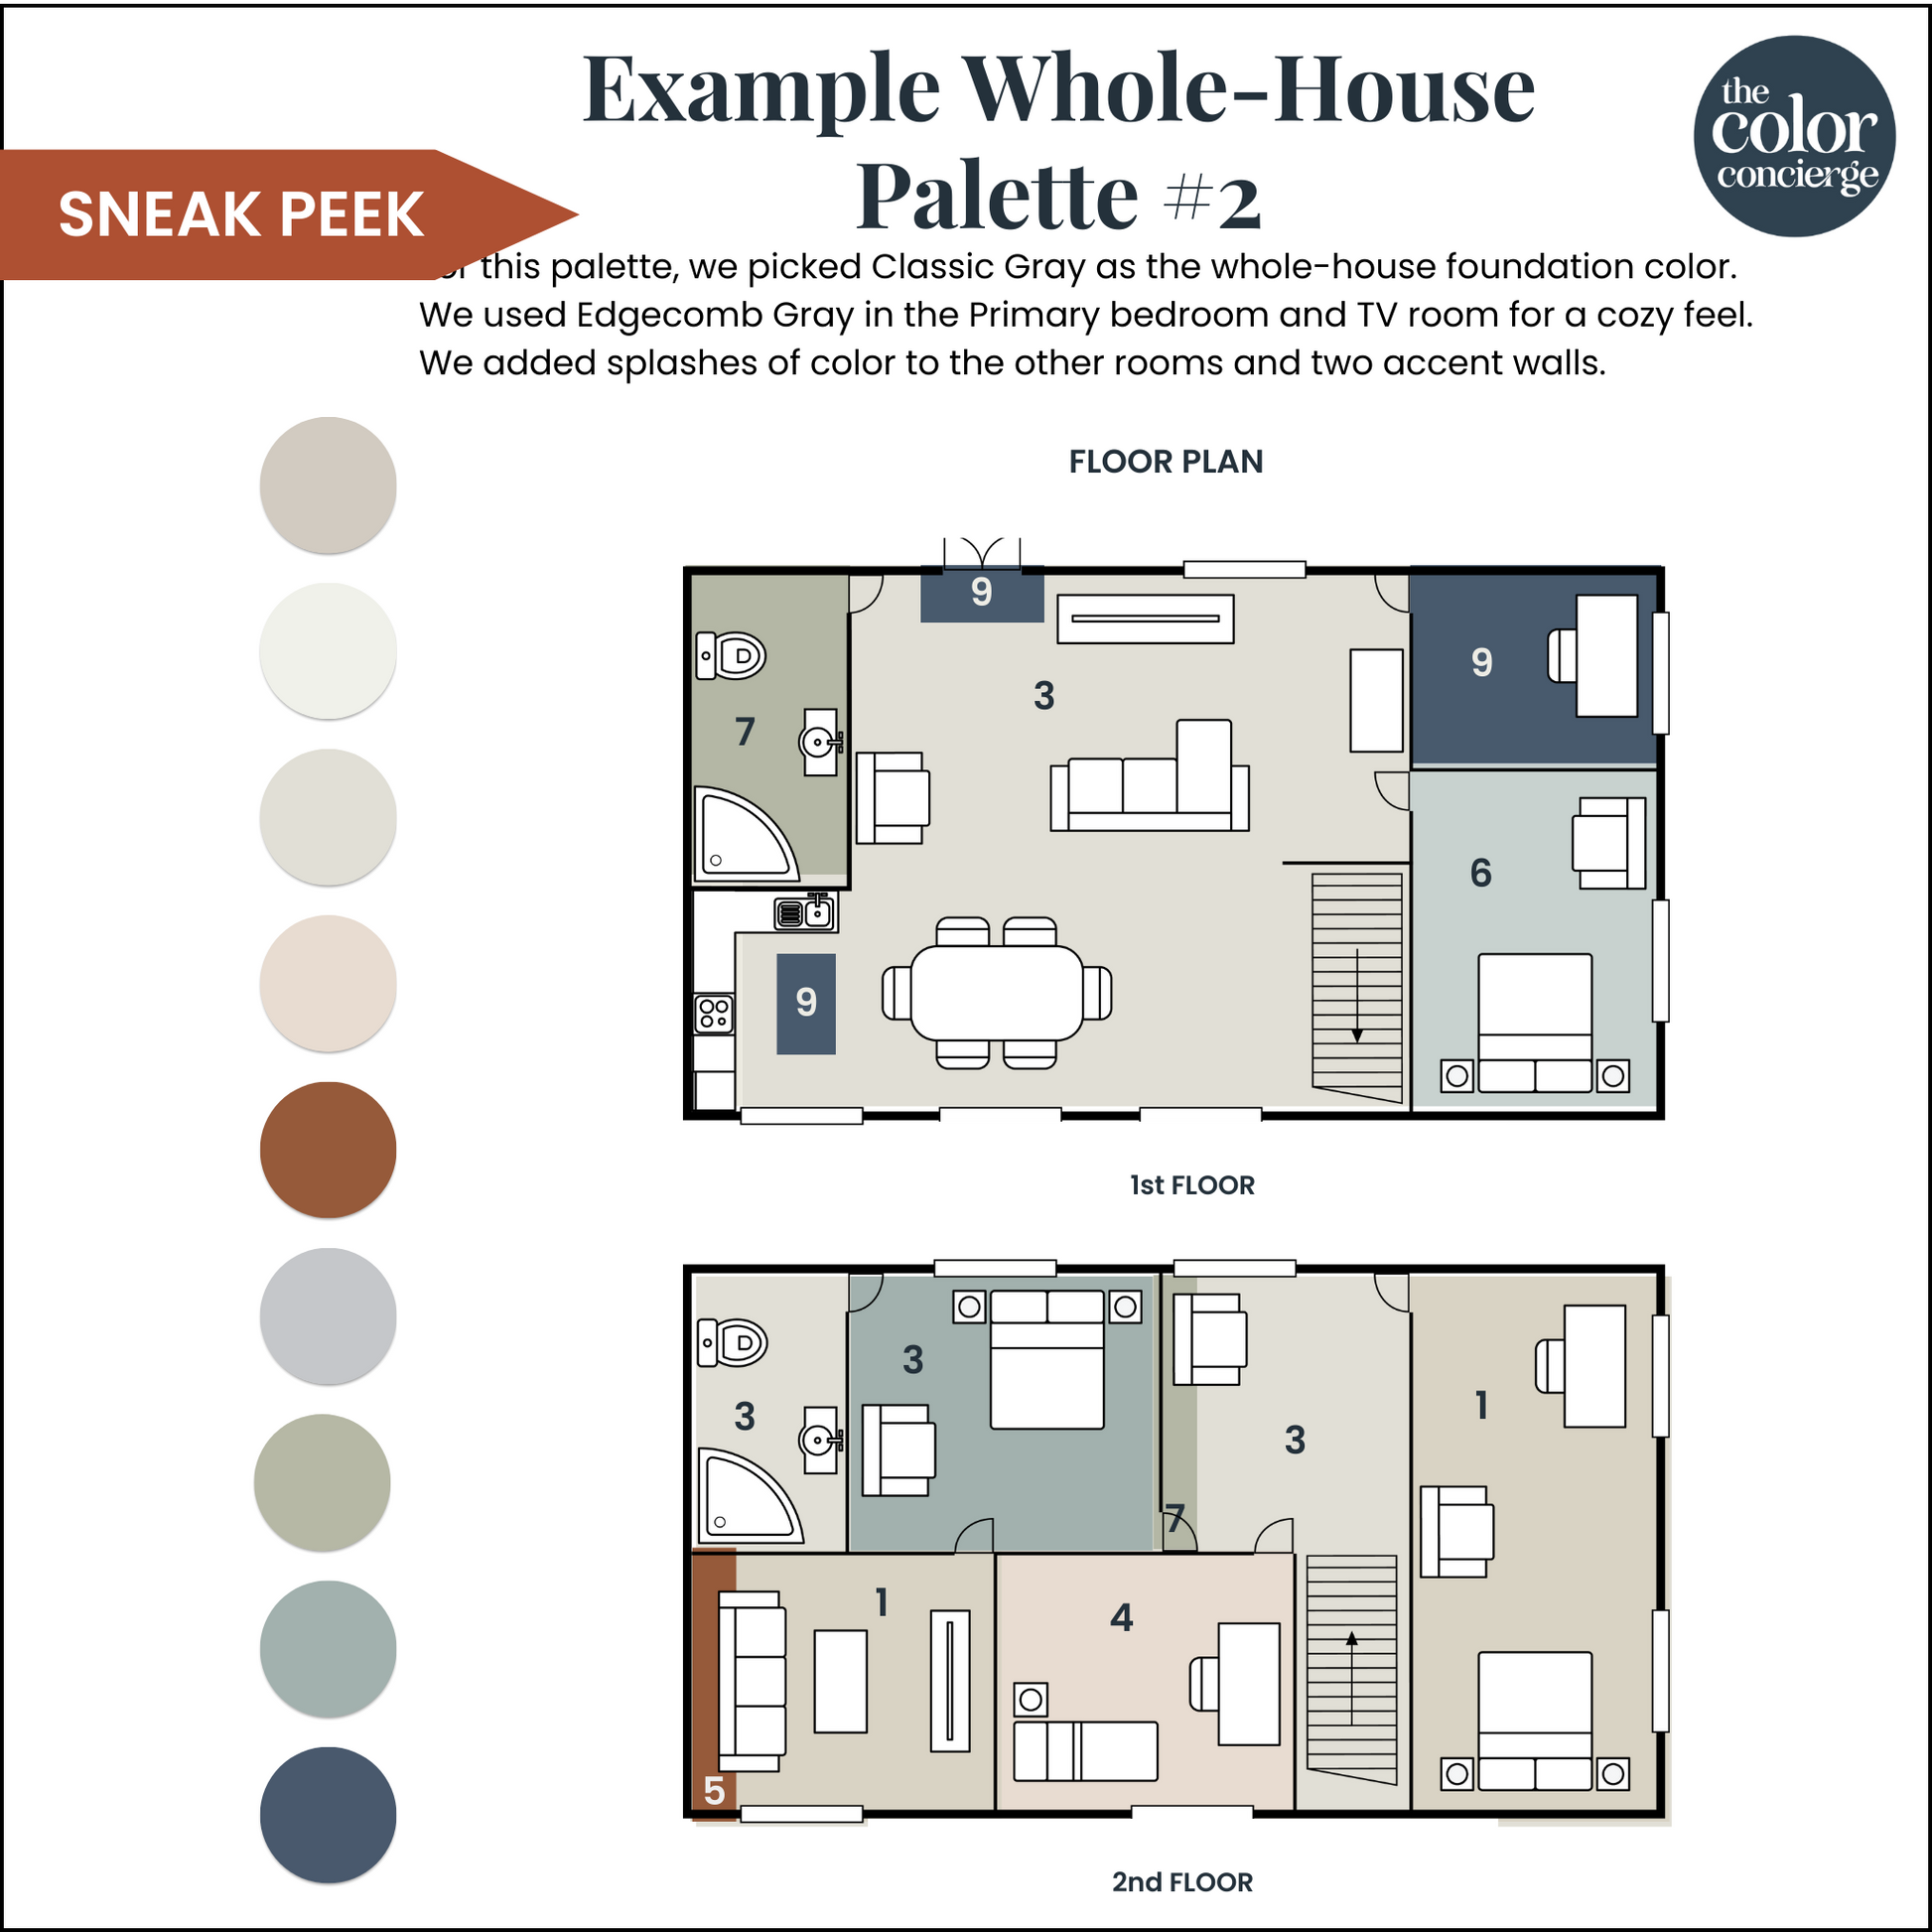 A whole-house color palette example using a Benjamin Moore Edgecomb Gray color palette